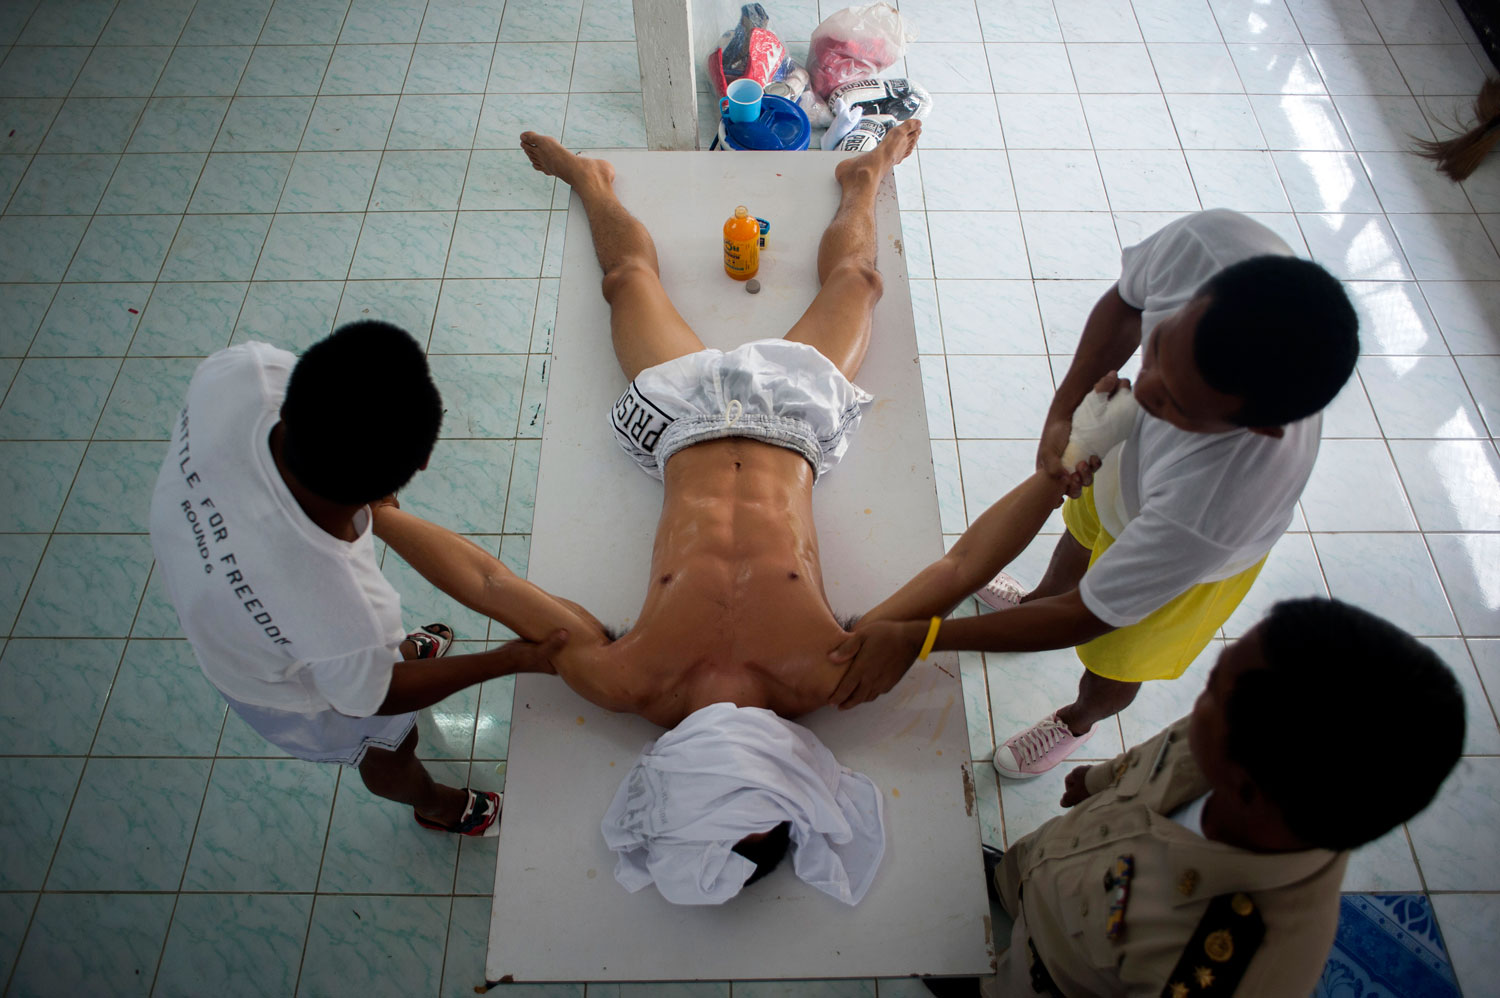 Inmates And Foreigners Compete In Thailand's Prison Fight